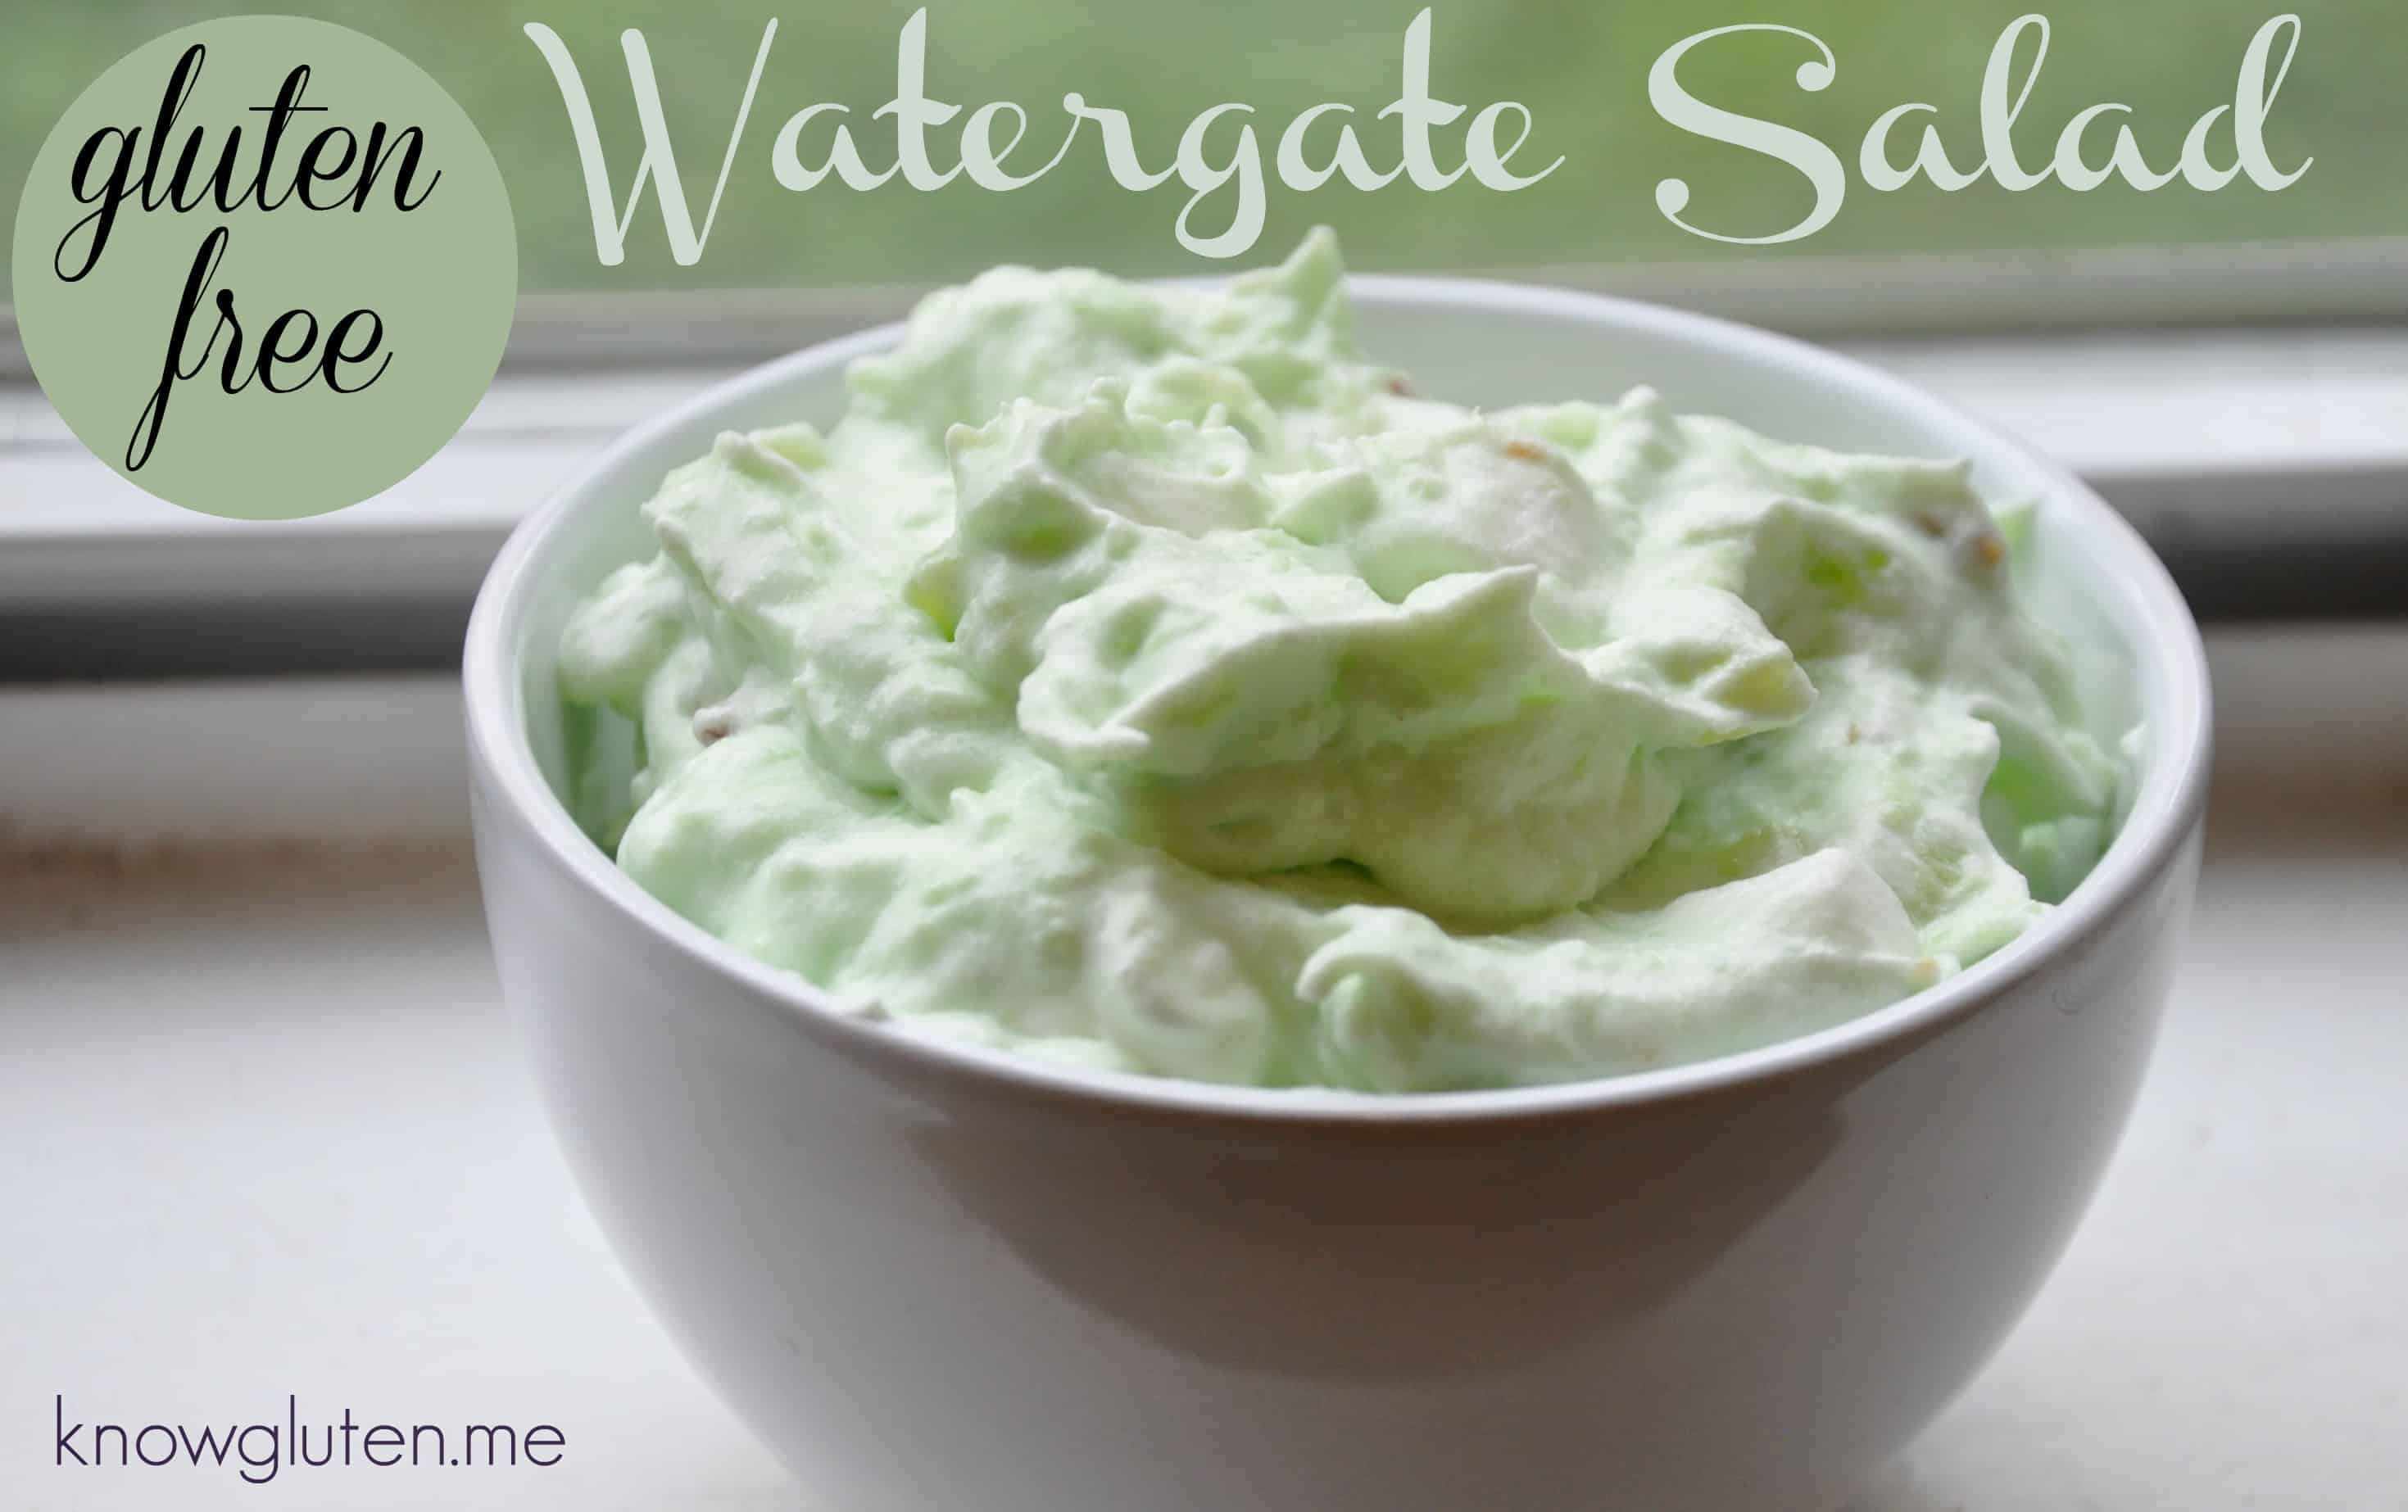 Gluten Free Watergate Salad in a white bowl by a window.